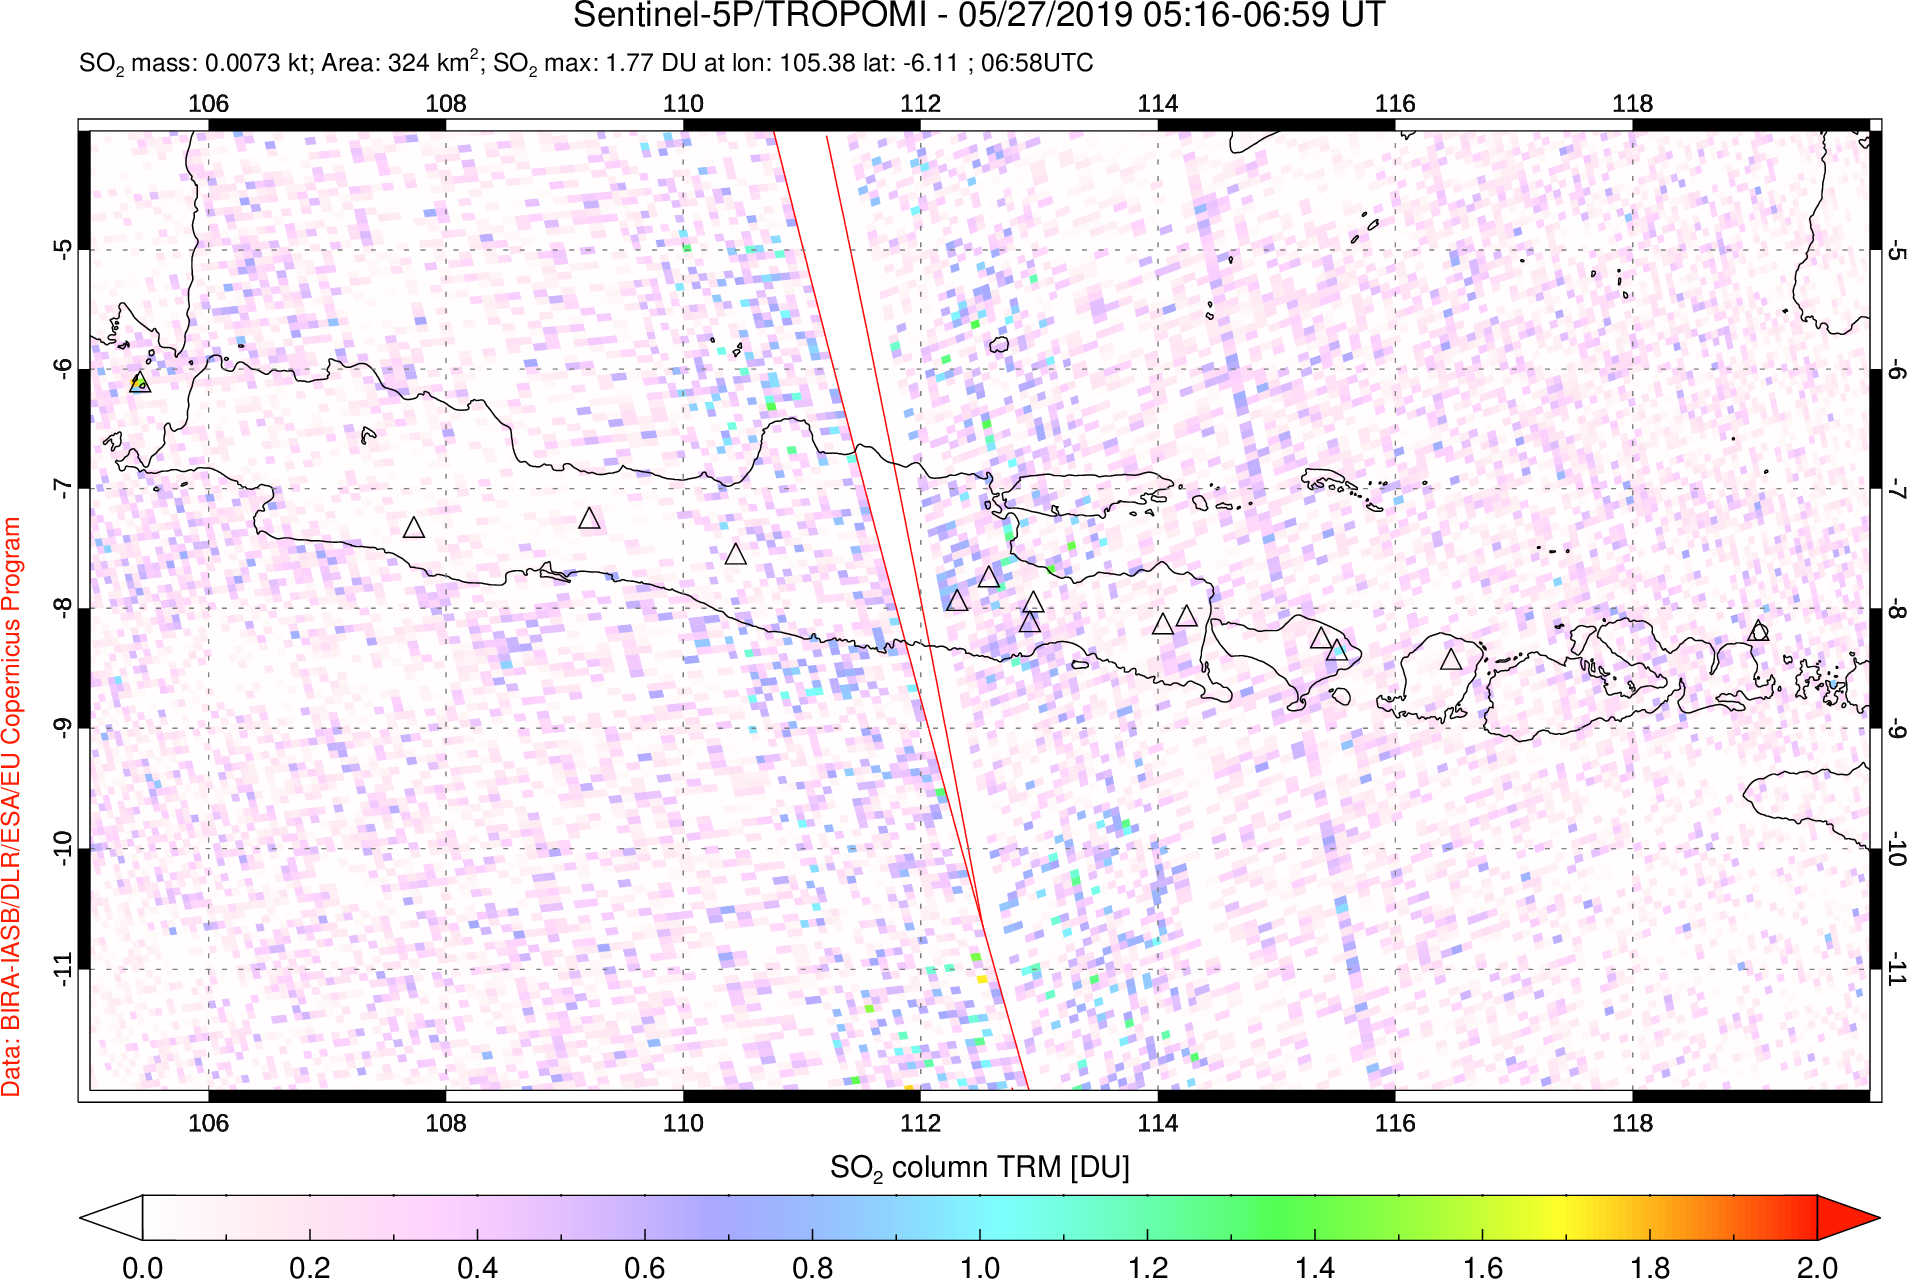 A sulfur dioxide image over Java, Indonesia on May 27, 2019.